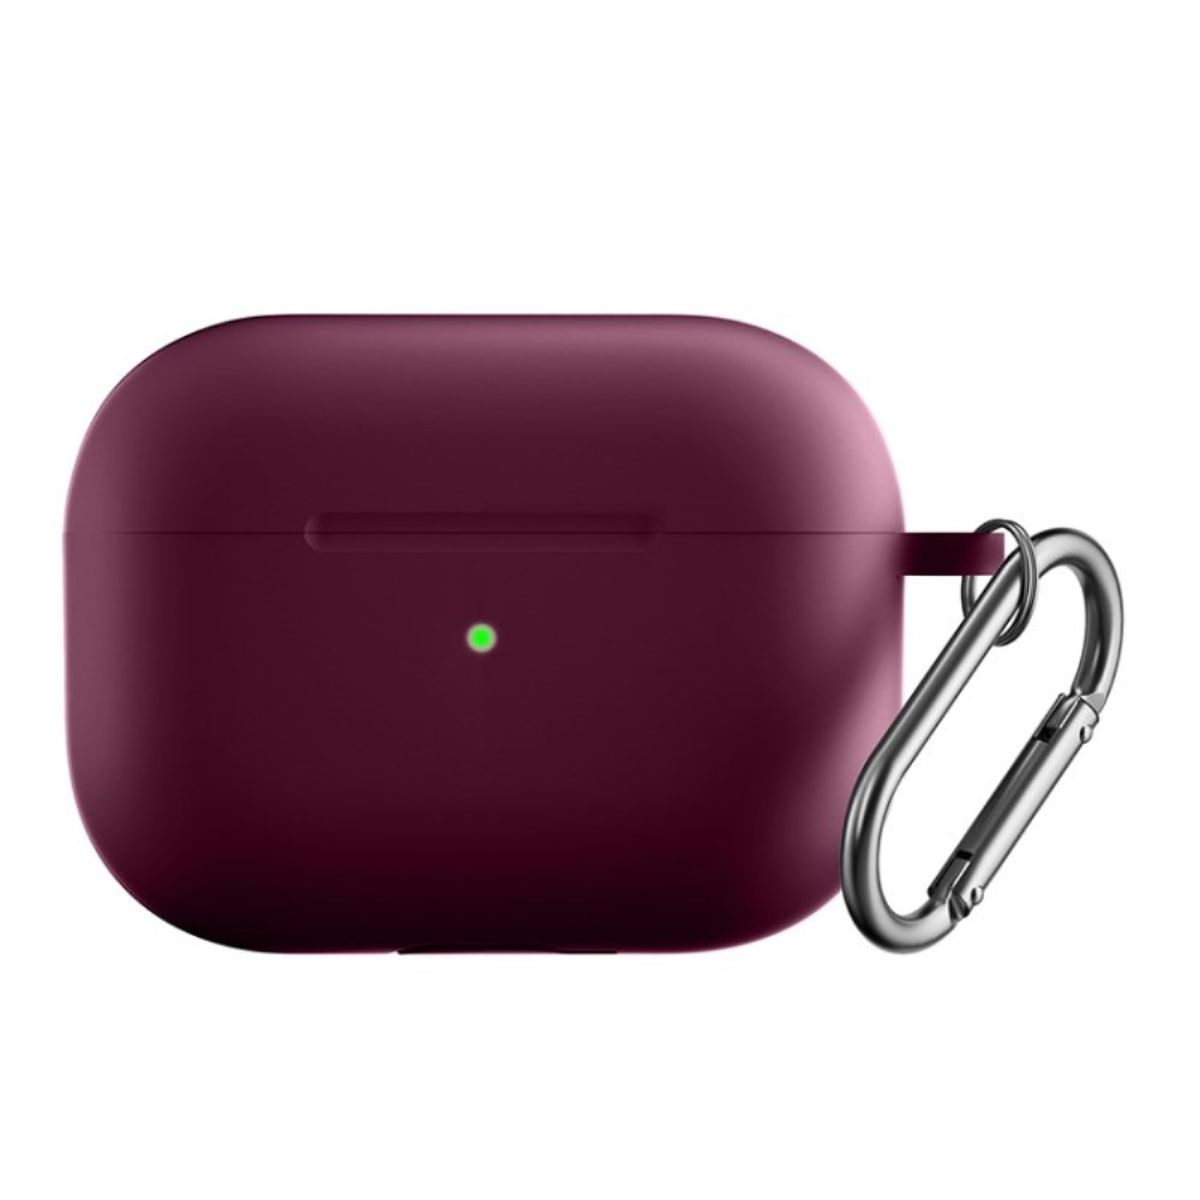 x Pro Airpods Apple Silikoncover für Ladecase COVERKINGZ weinrot, 2